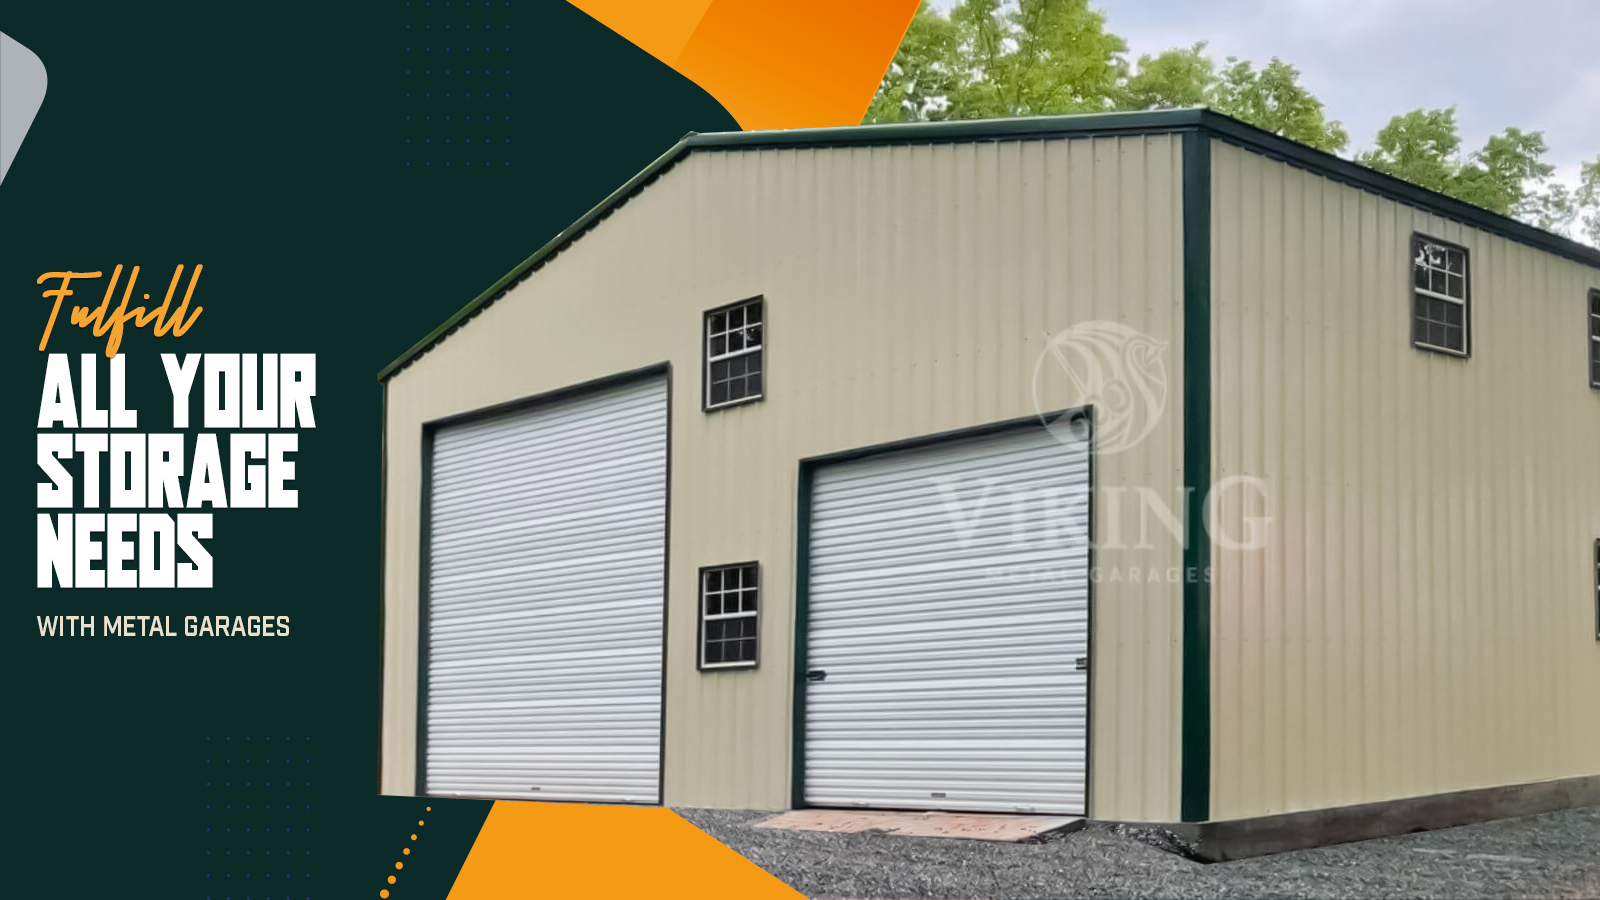 Fulfill All Your Storage Needs With Metal Garages